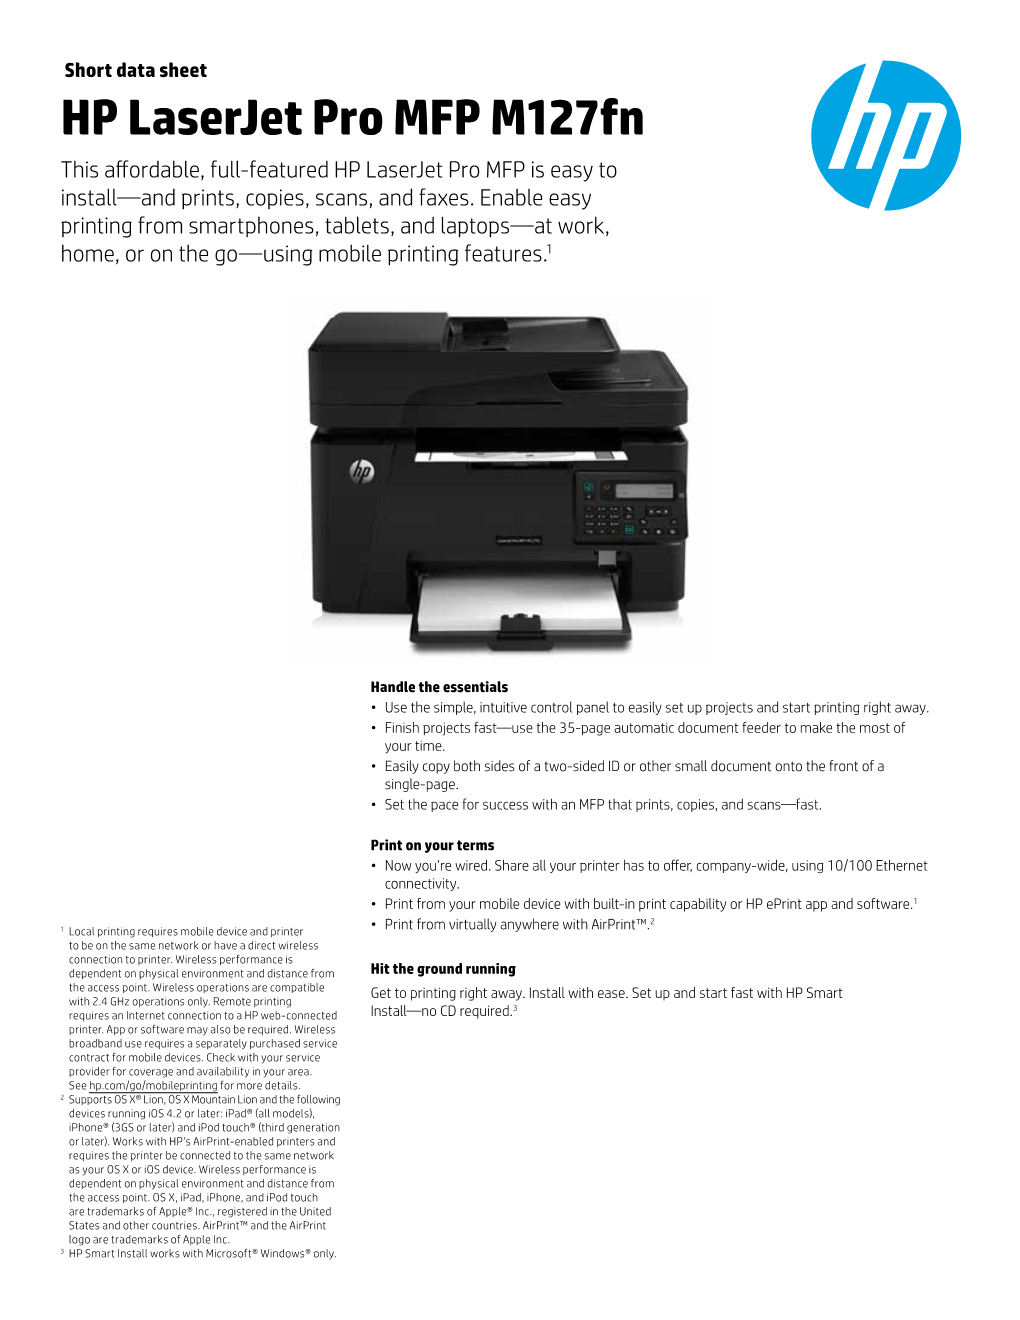 HP Laserjet Pro MFP M127fn This Affordable, Full-Featured HP Laserjet Pro MFP Is Easy to Install—And Prints, Copies, Scans, and Faxes